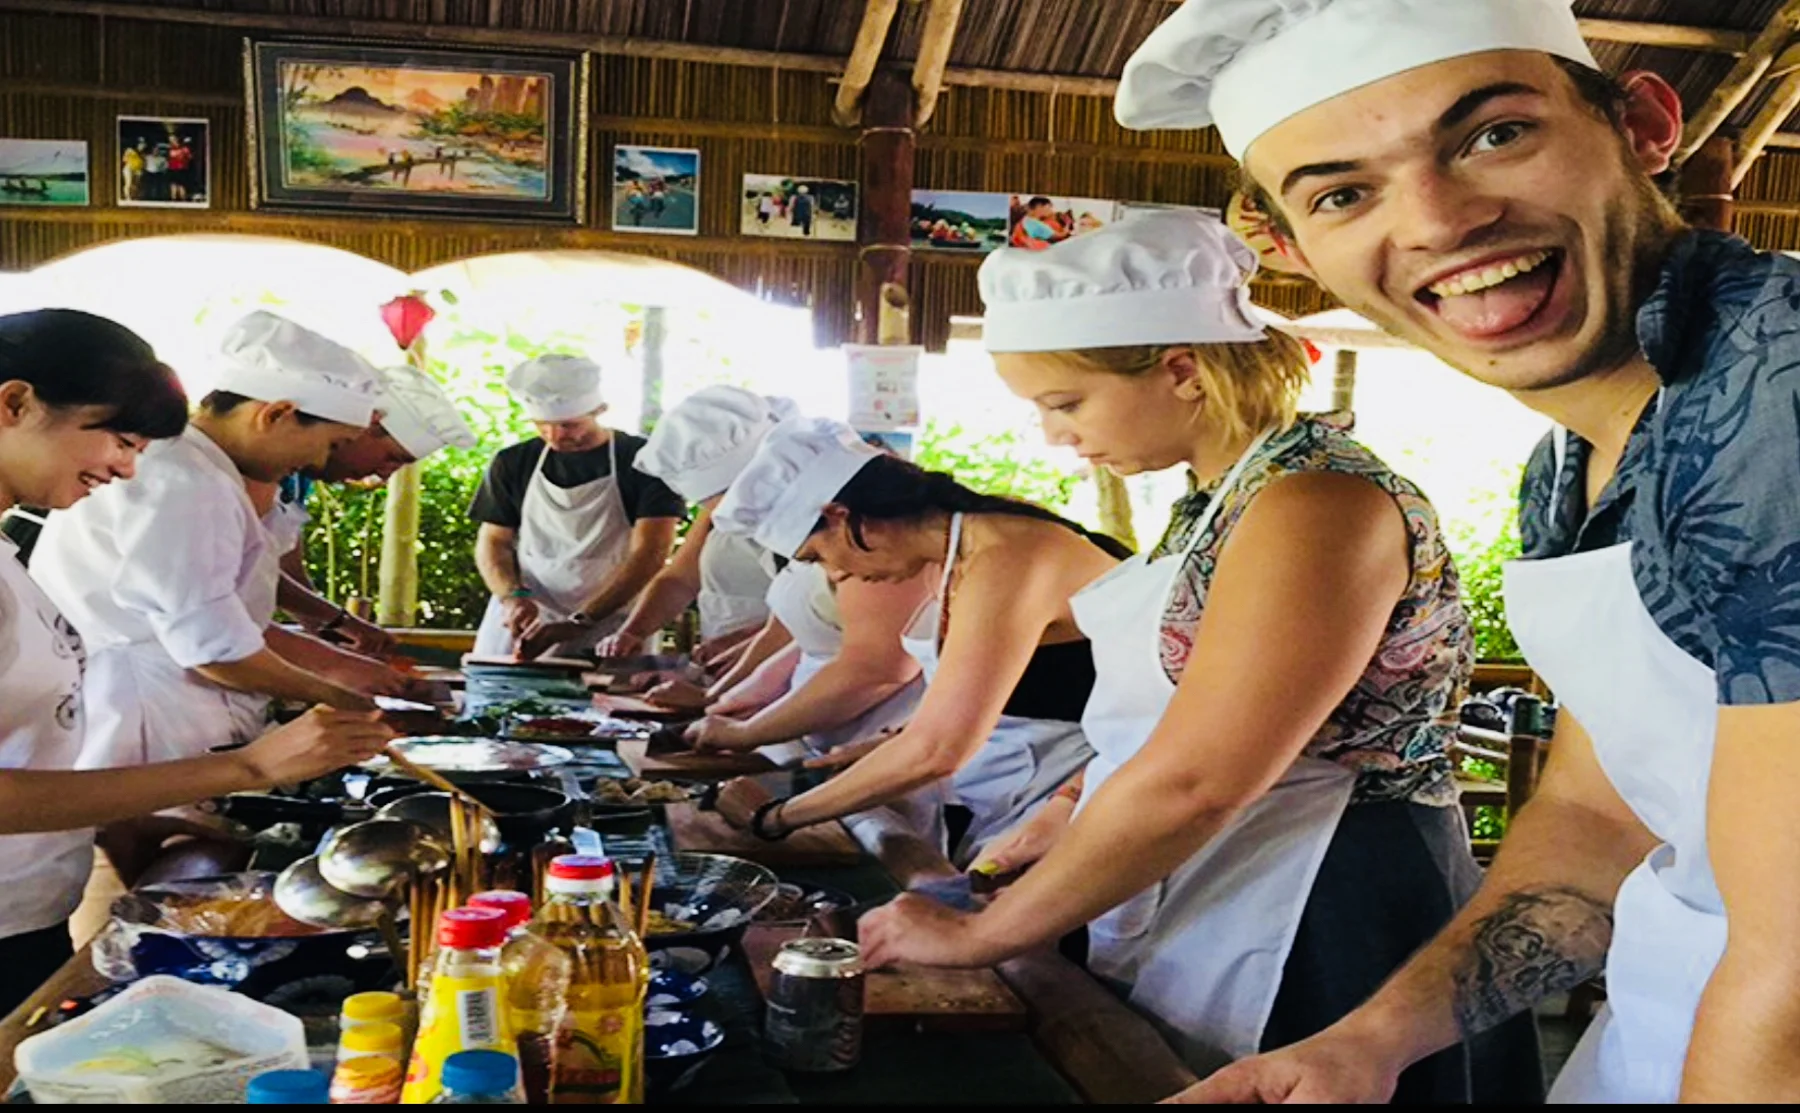 Tour The Markets Of Hoi An And Take A Cooking Class After - 1300860